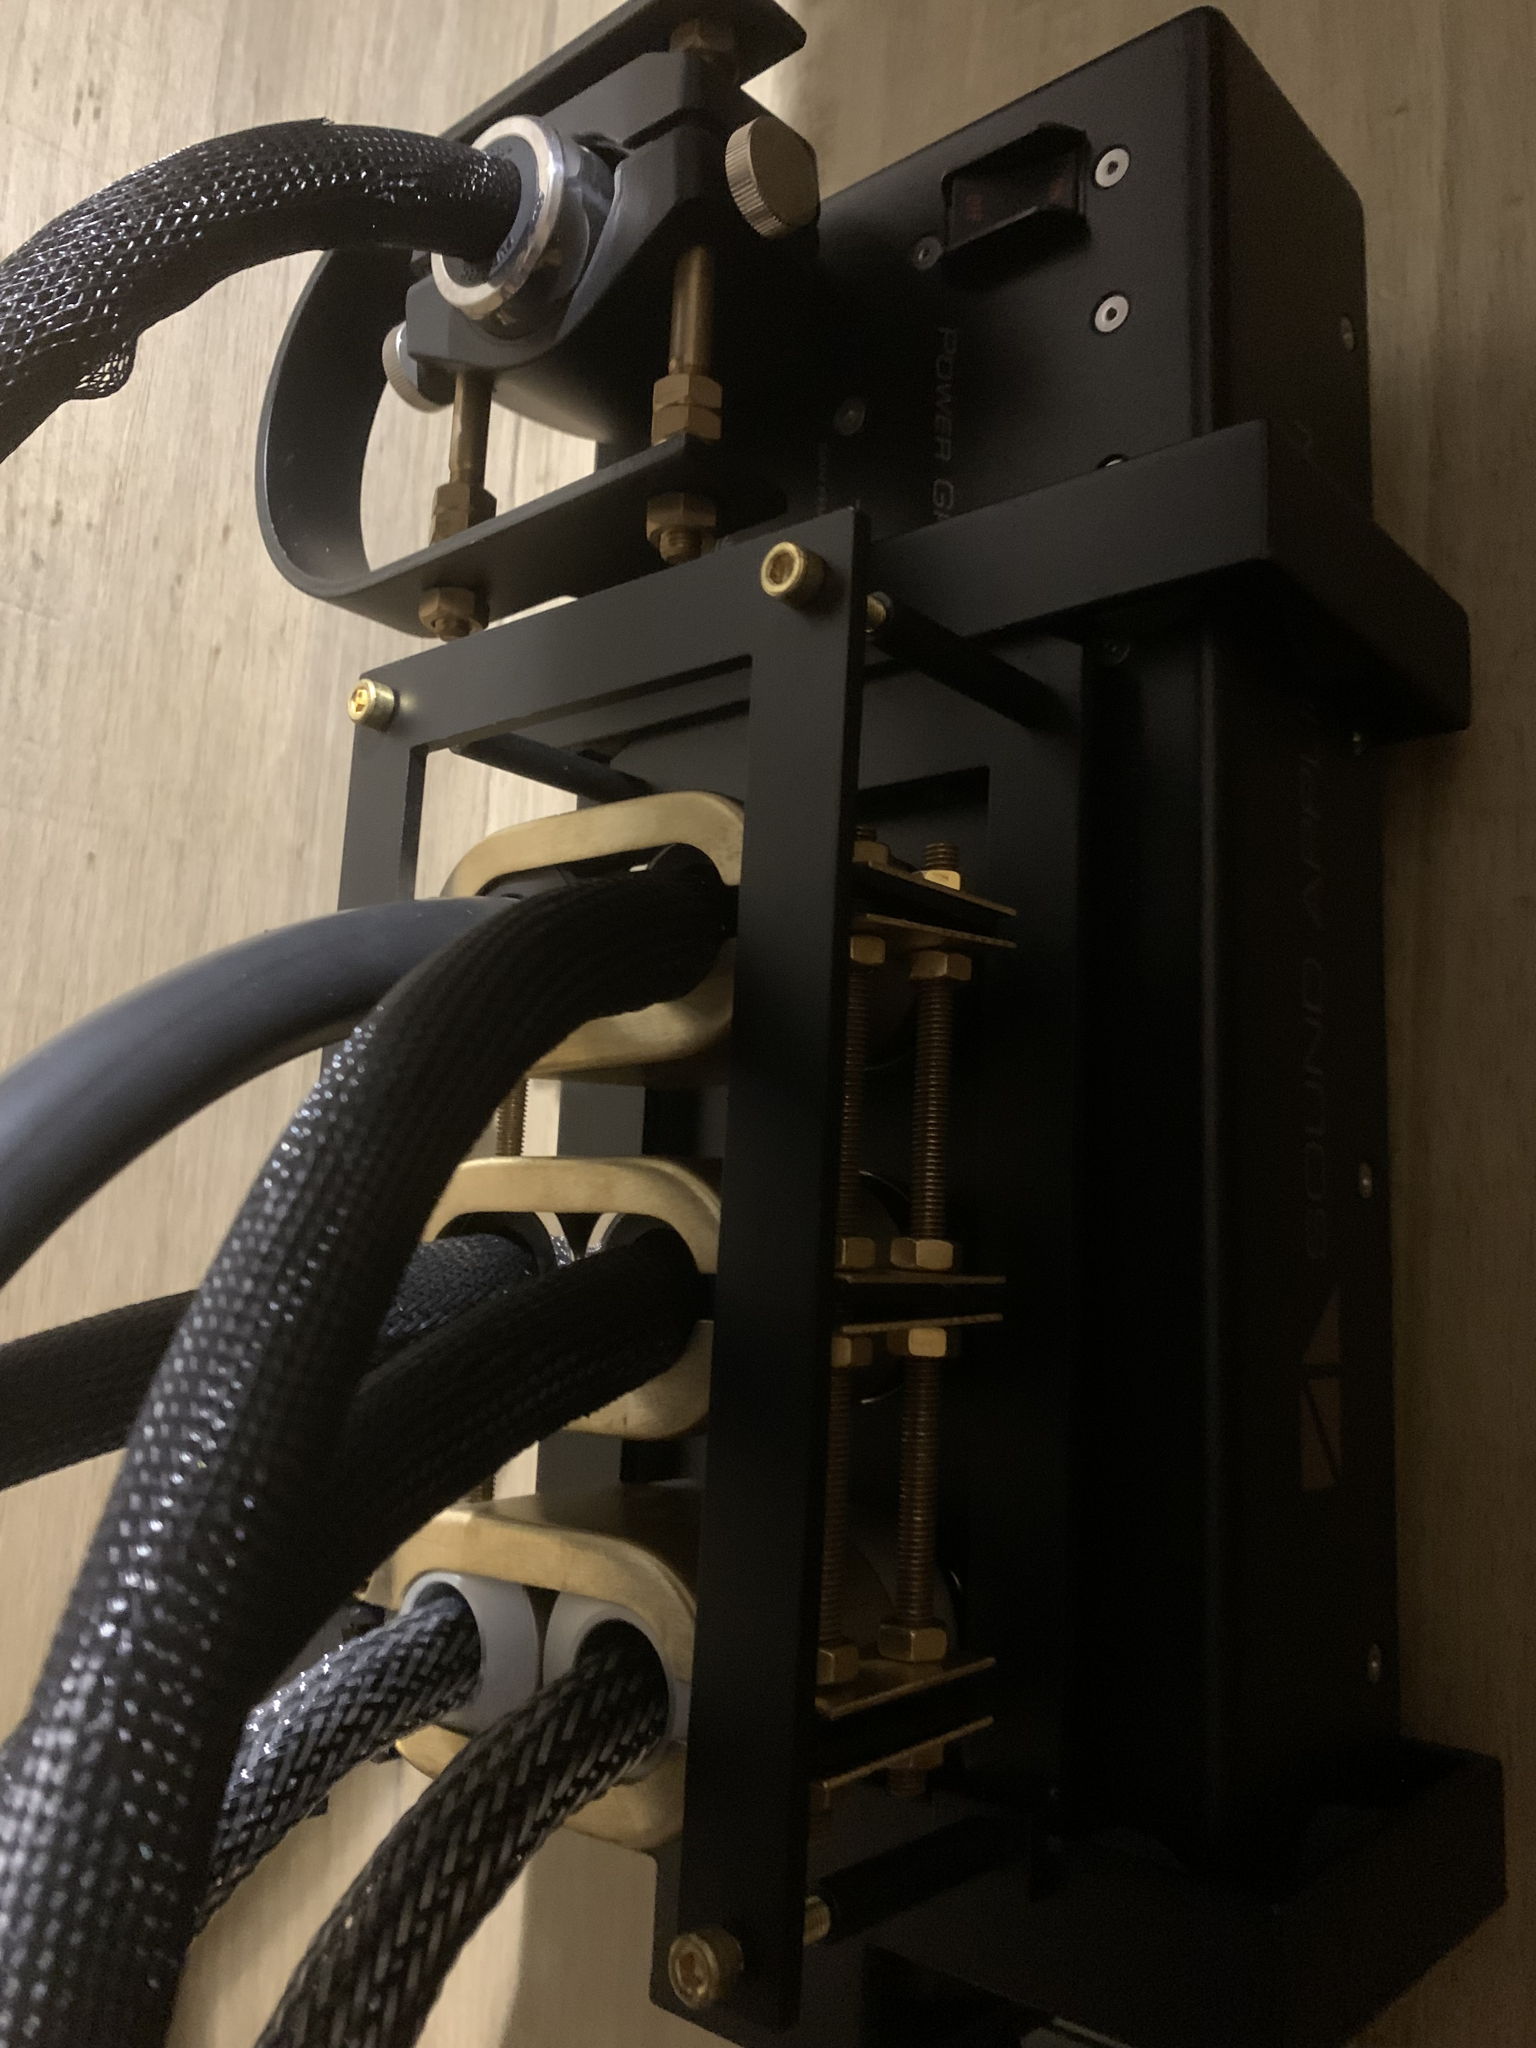 Power bank with custom brass clamp system to anchor connectors to their ports.